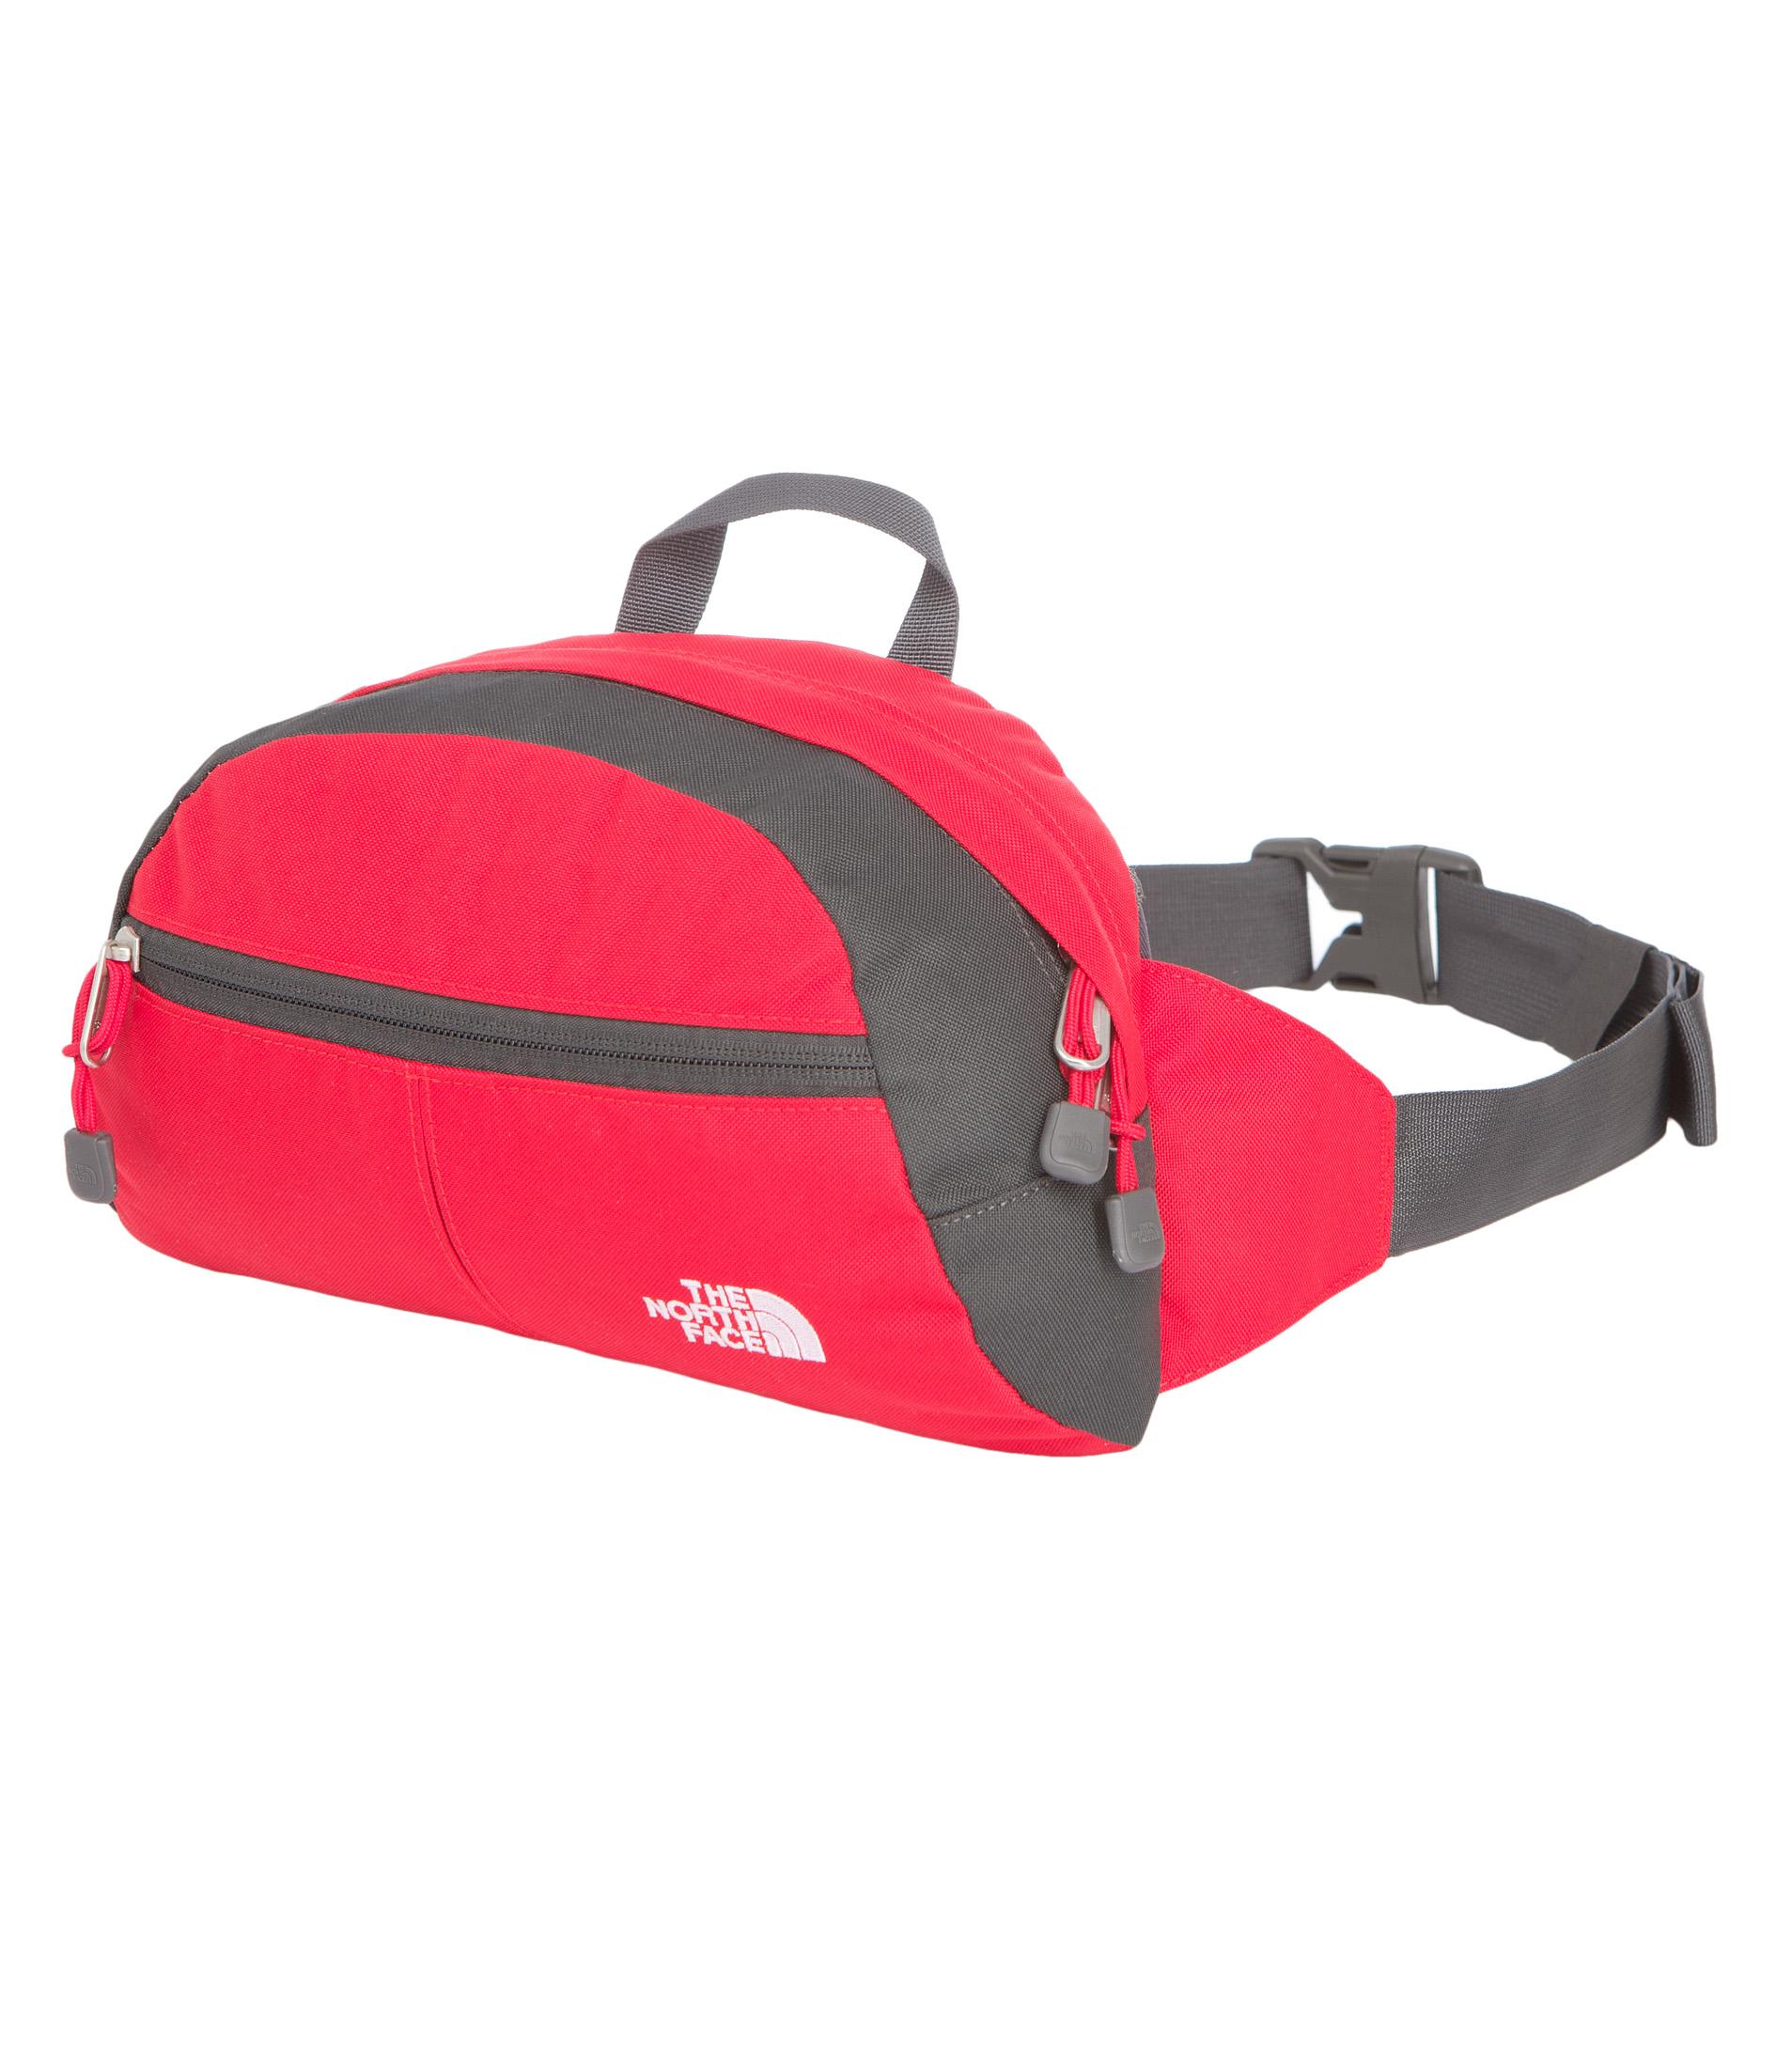 Foto The North Face Roo II Waist Pack foto 303641